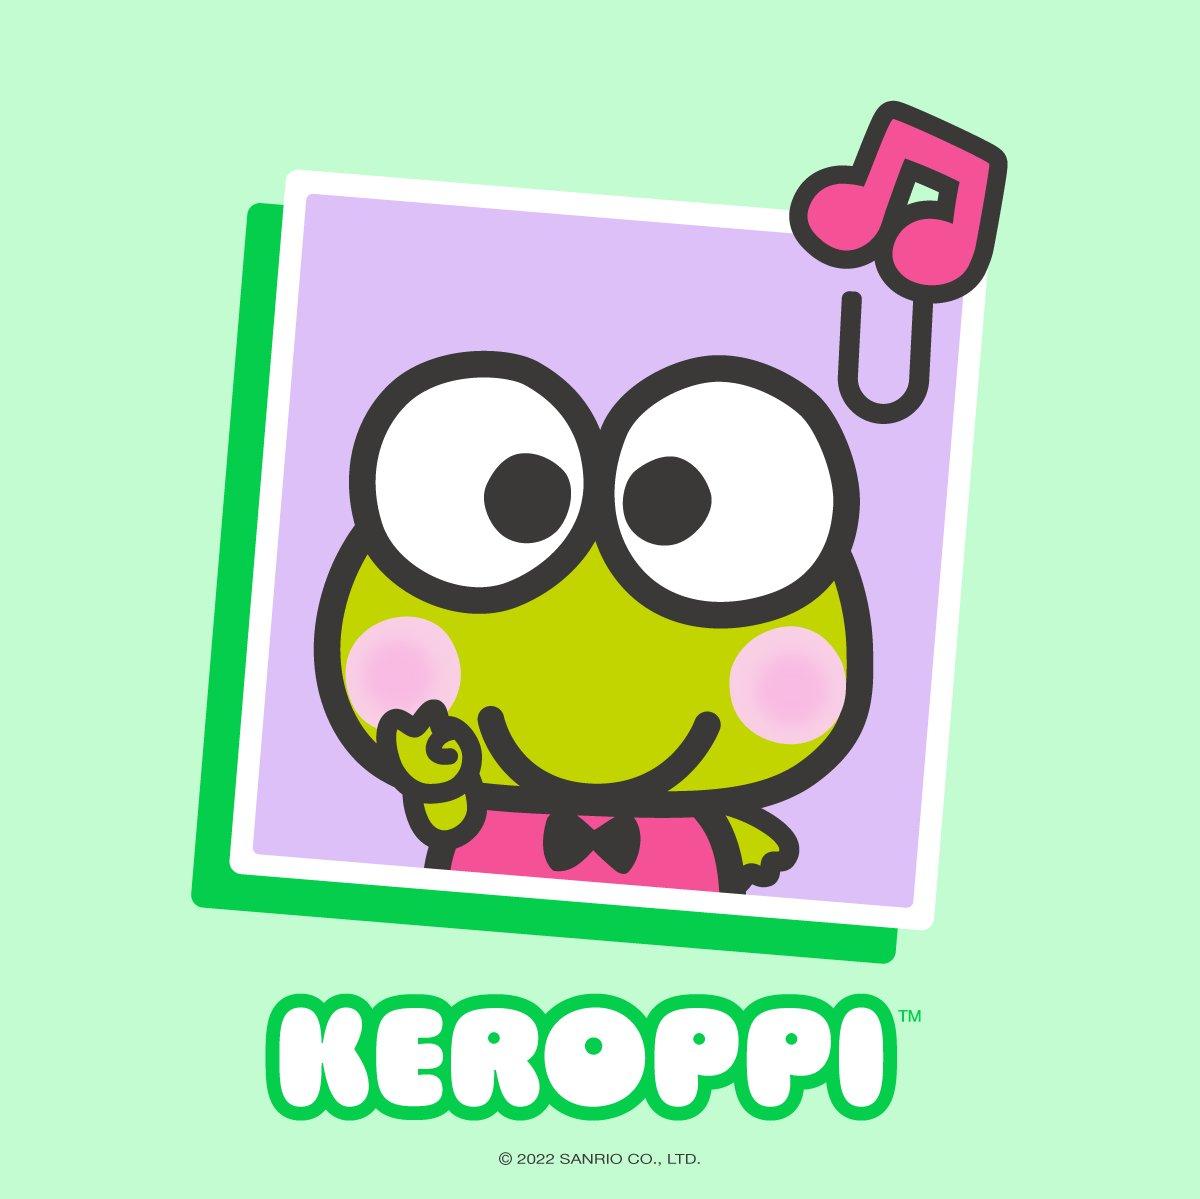 Sanrio on Were feeling hoppy because Keroppi is our